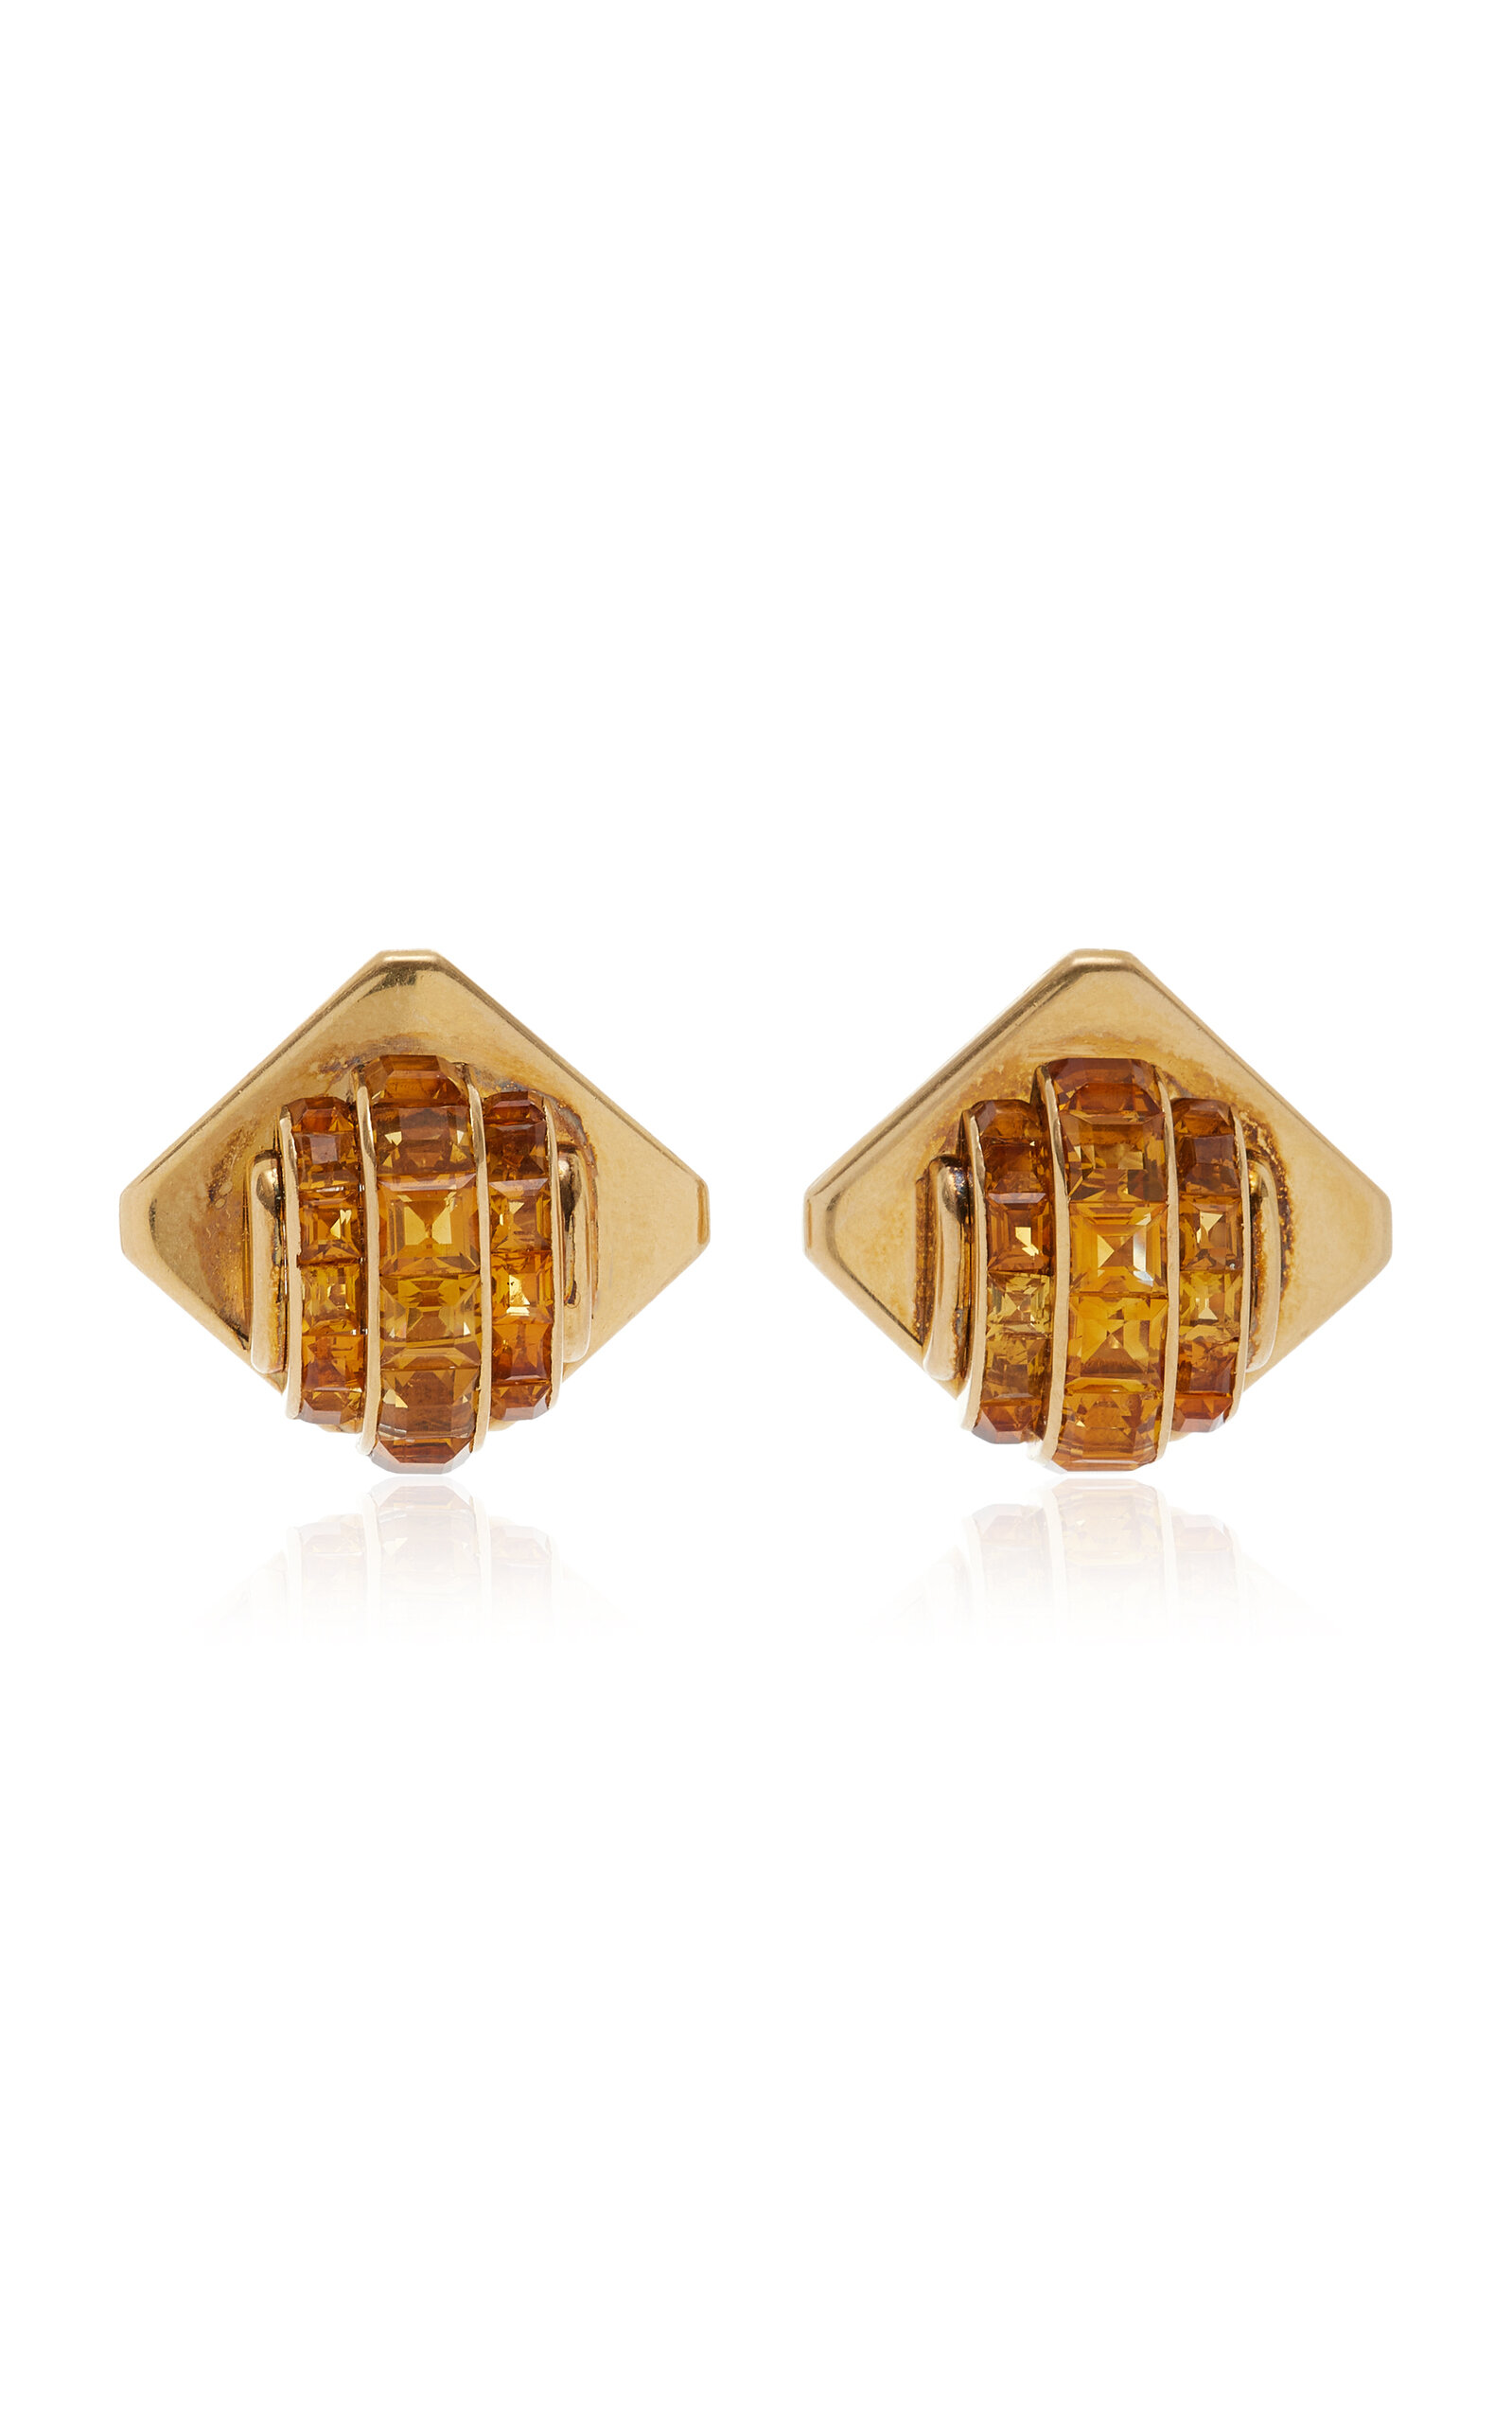 One-of-a-Kind 18K Yellow Gold Citrine Cartier Earrings